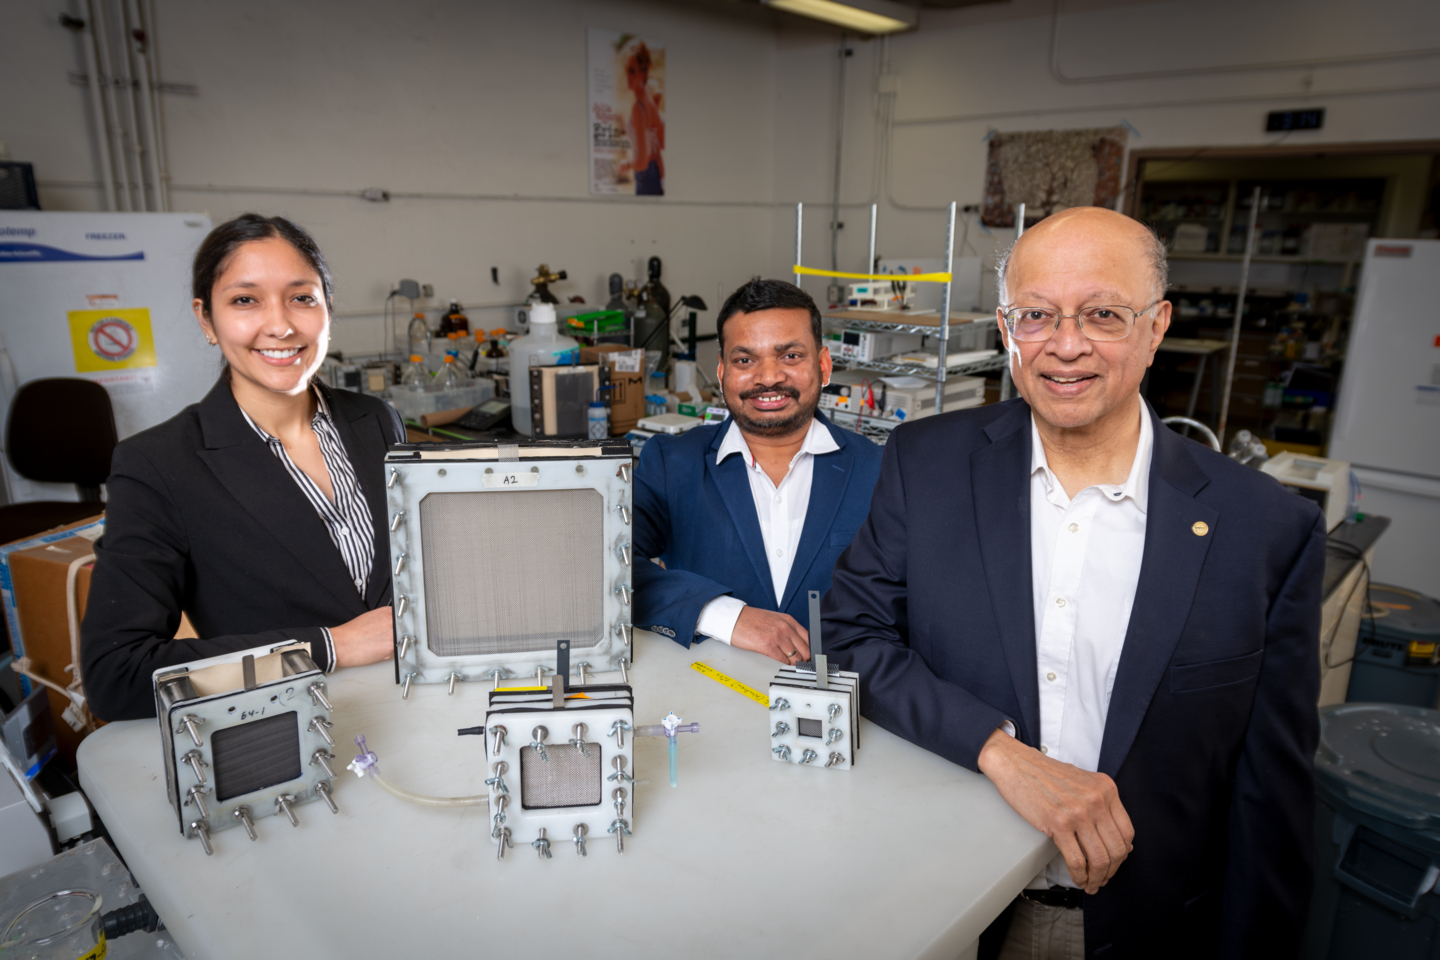  (Left to Right) Dana Hernandez, Siva Bandaru, and Ashok Gadgil with the arsenic filters they developed. (Credit: Thor Swift/Berkeley Lab)